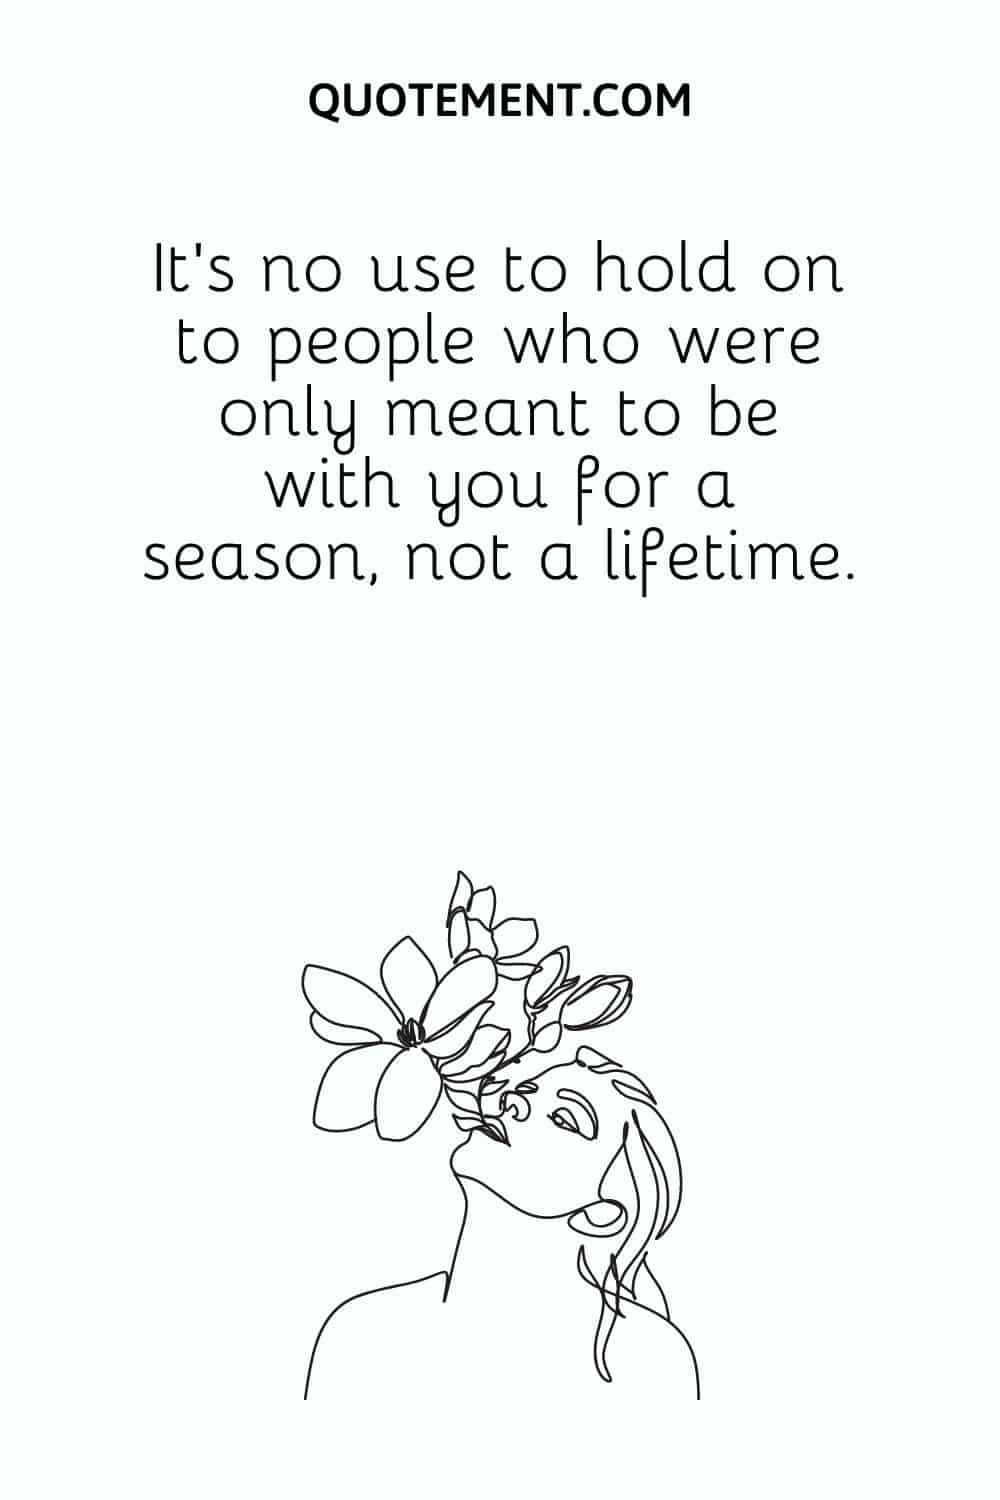 It’s no use to hold on to people who were only meant to be with you for a season, not a lifetime.